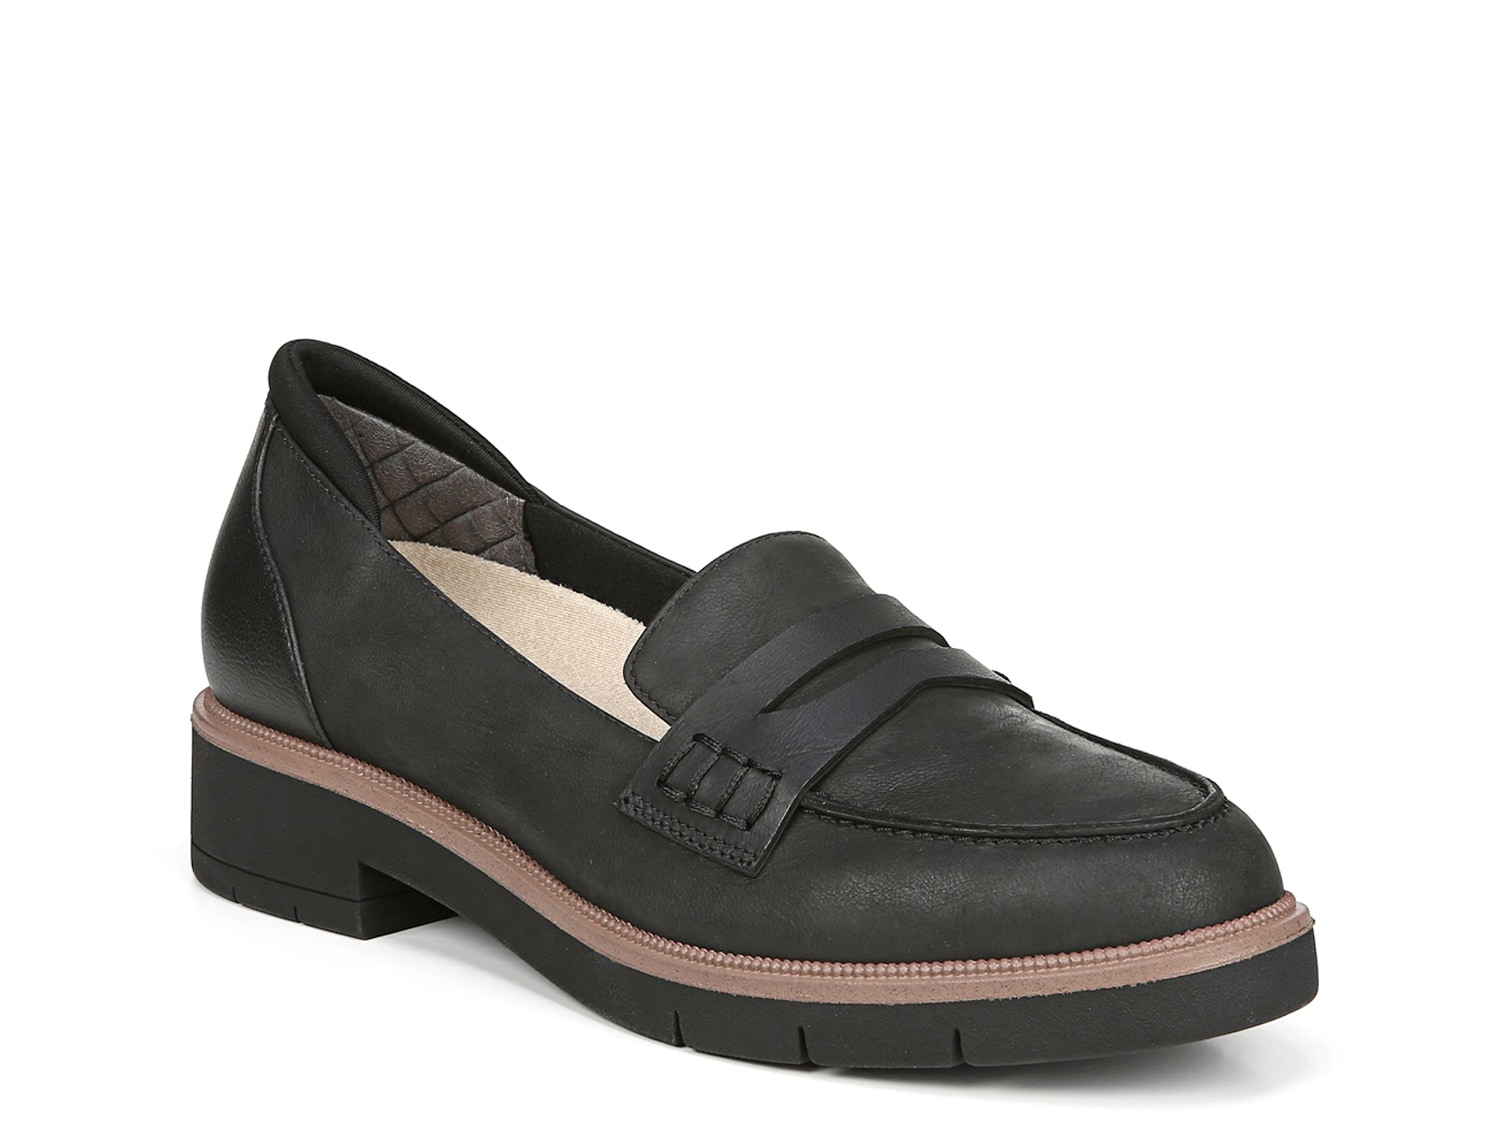 dr scholl's penny loafers